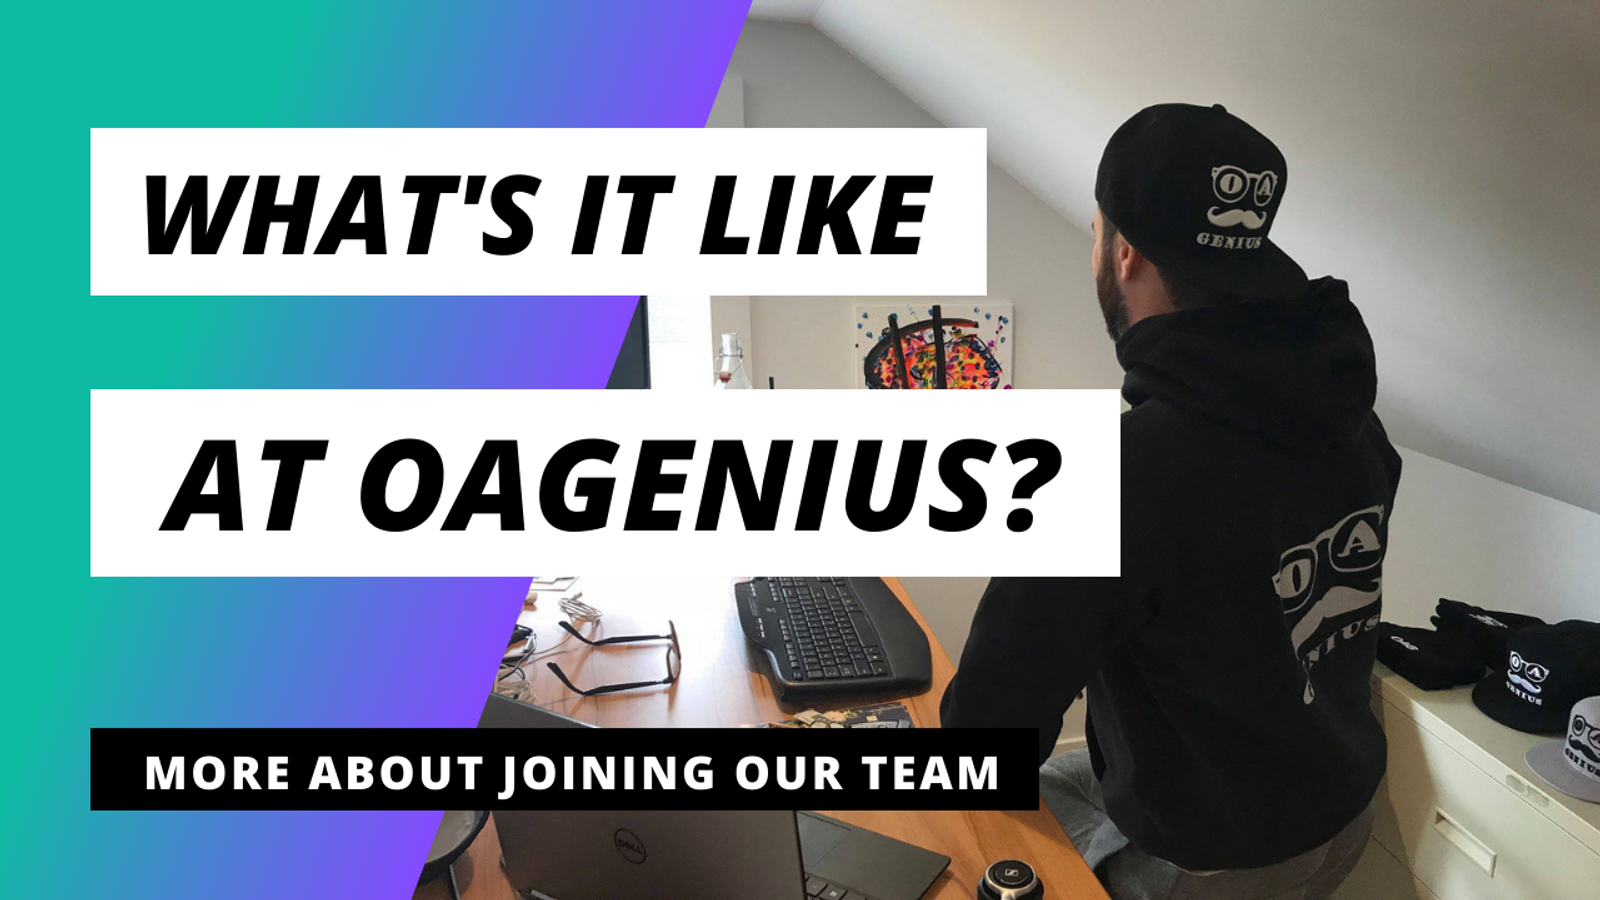 Why should you work at OAGenius?